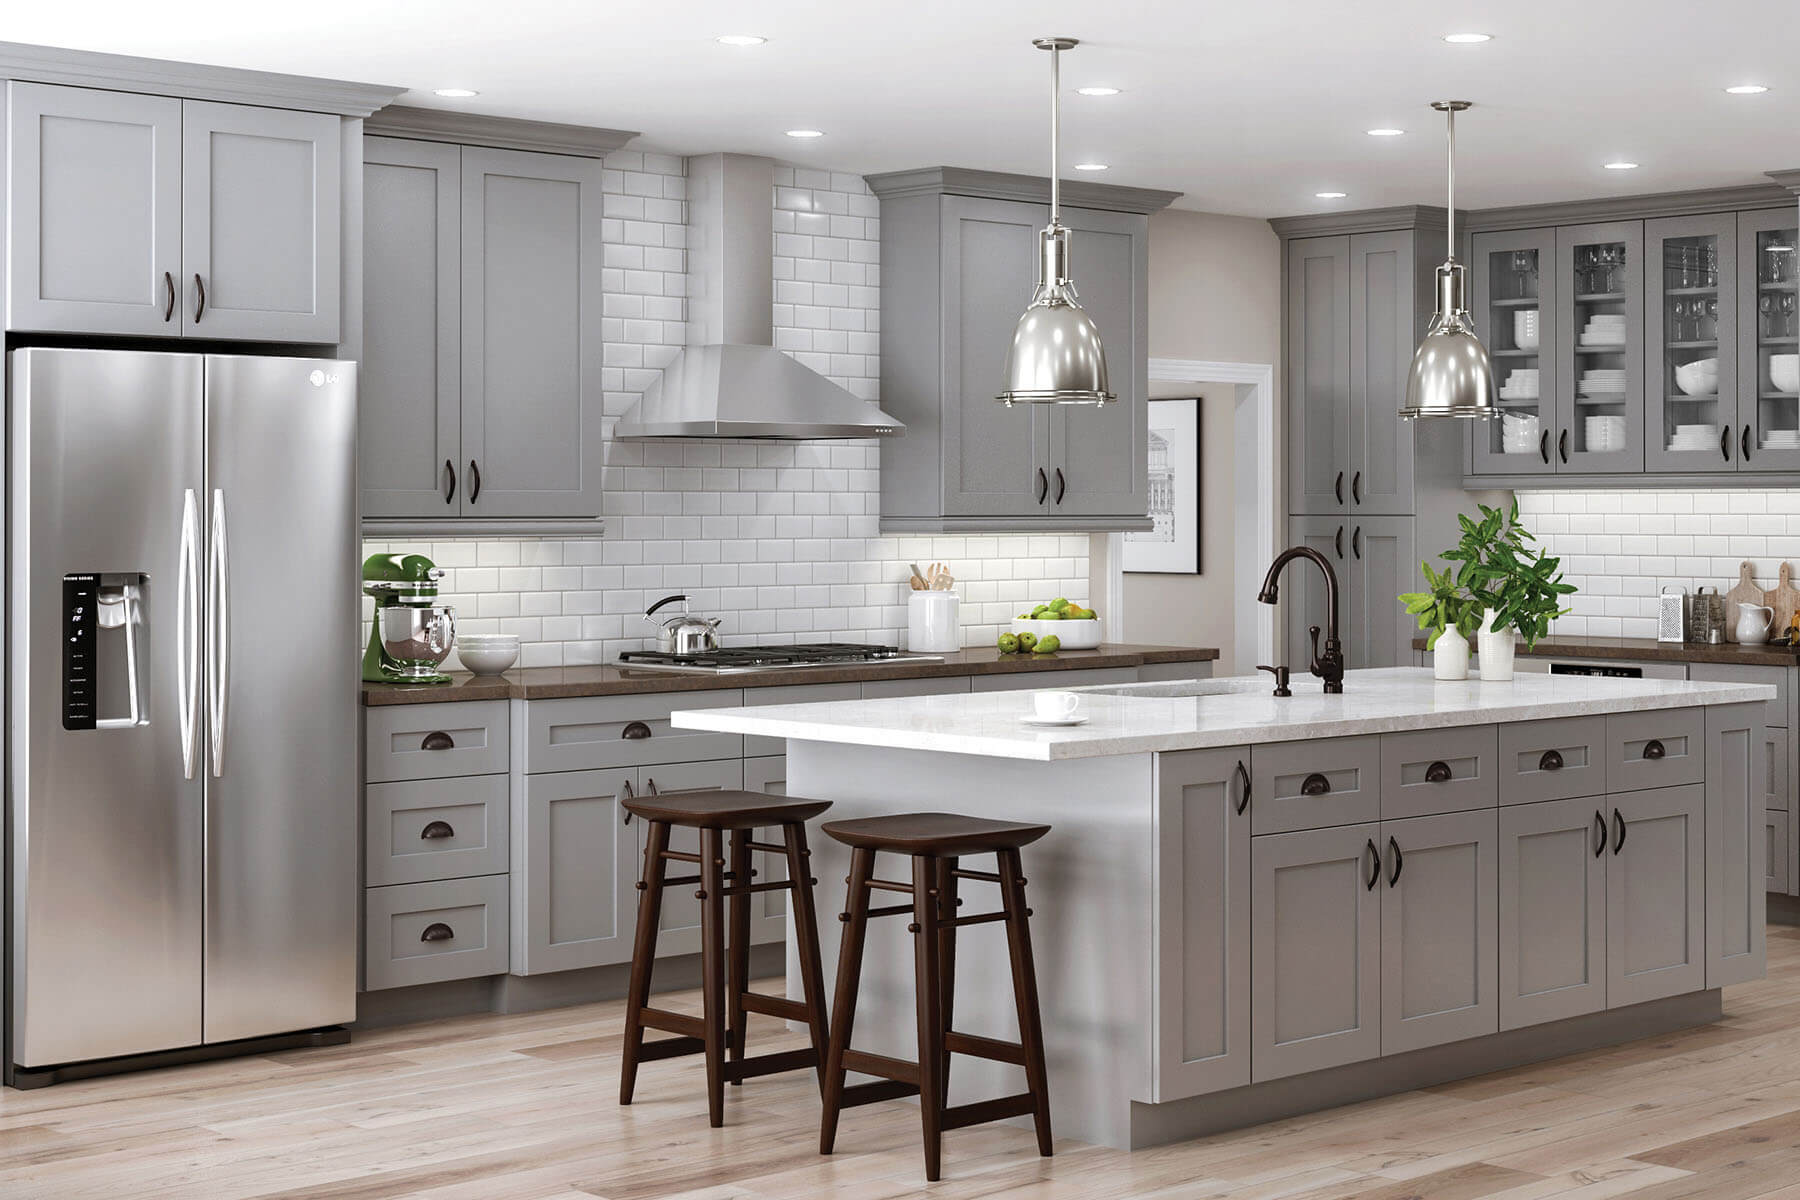 Kitchen Remodeling And Renovation Costs In 2021